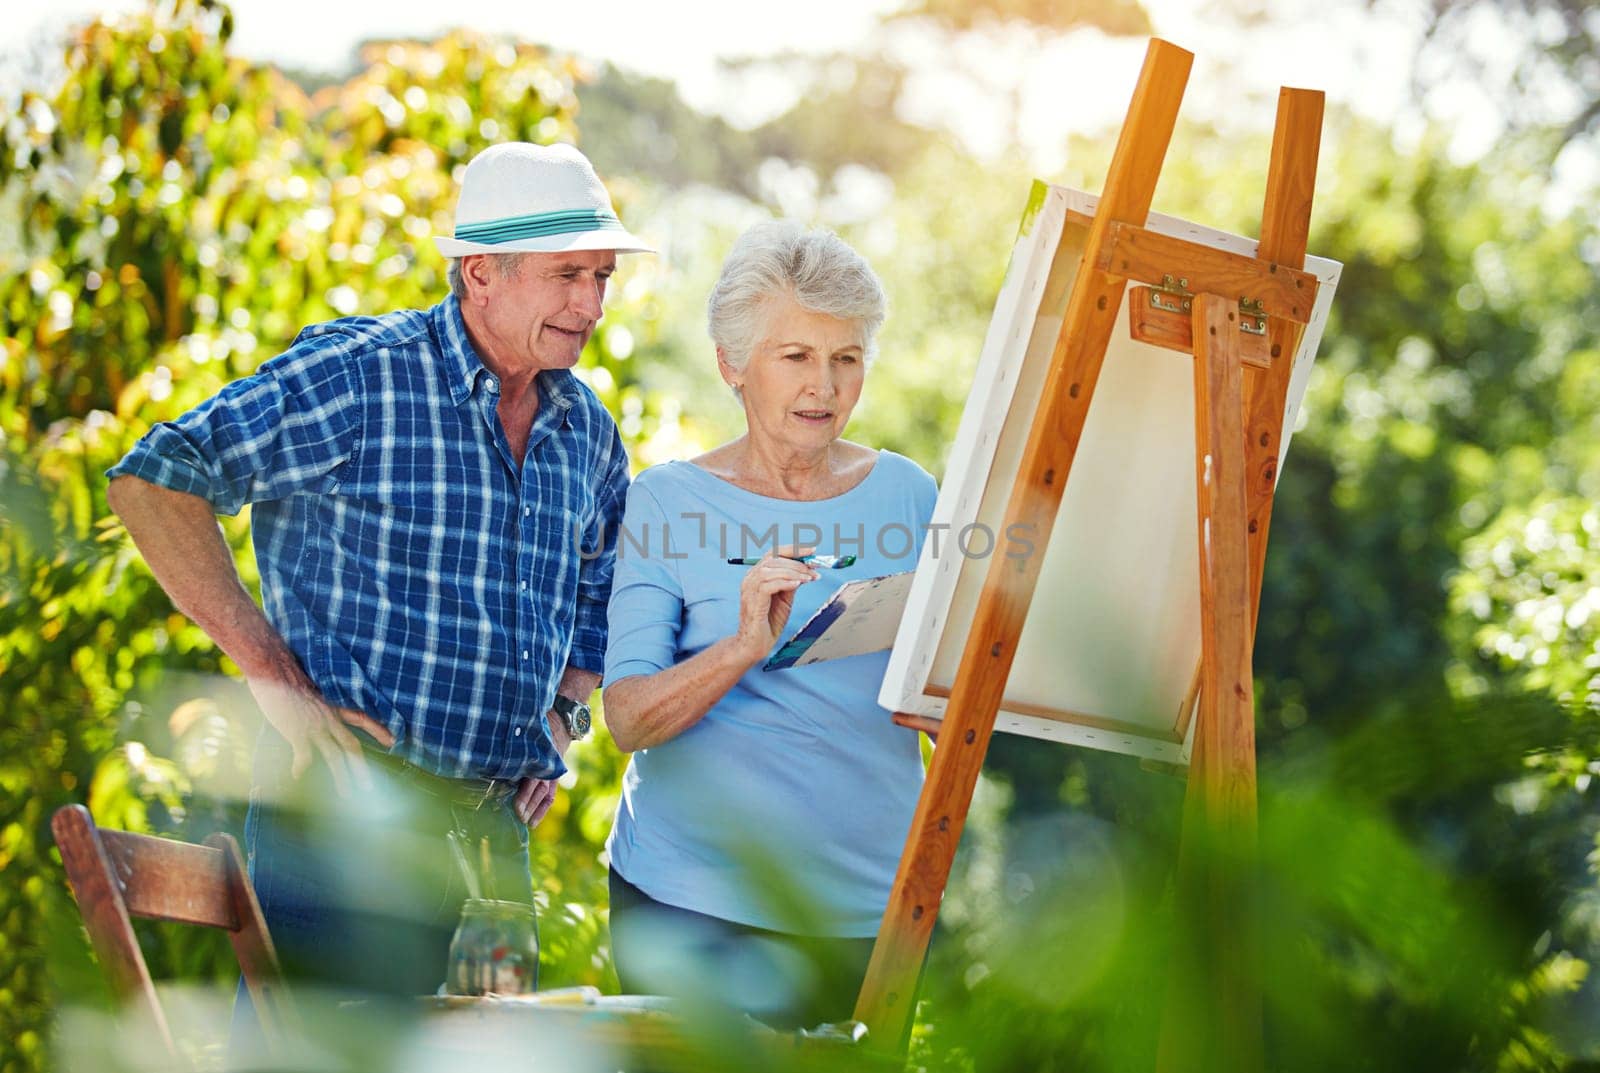 Her painting will be perfect. a senior couple painting in the park. by YuriArcurs